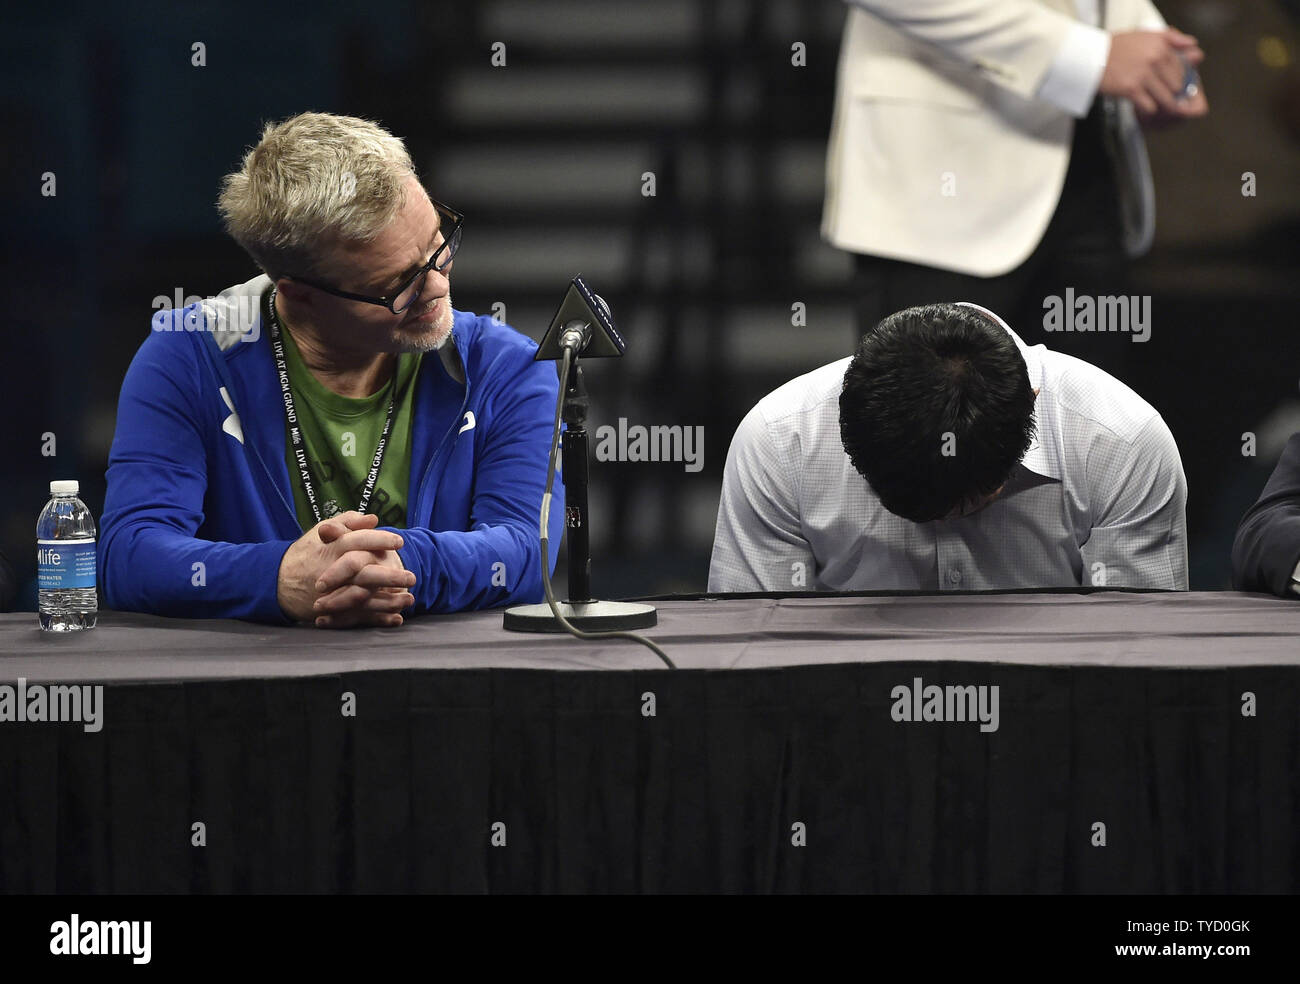 Manny Paciquiao, right, hangs his head as his trainer, Freddie Roach looks on during a news conference after his welterweight unification bout against Floyd Mayweather Jr. at MGM Grand Garden Arena Saturday, May 2, 2015, in Las Vegas, Nevada. Mayweather won with an unanimous decision after the 12 round fight. Photo by David Becker/UPI Stock Photo